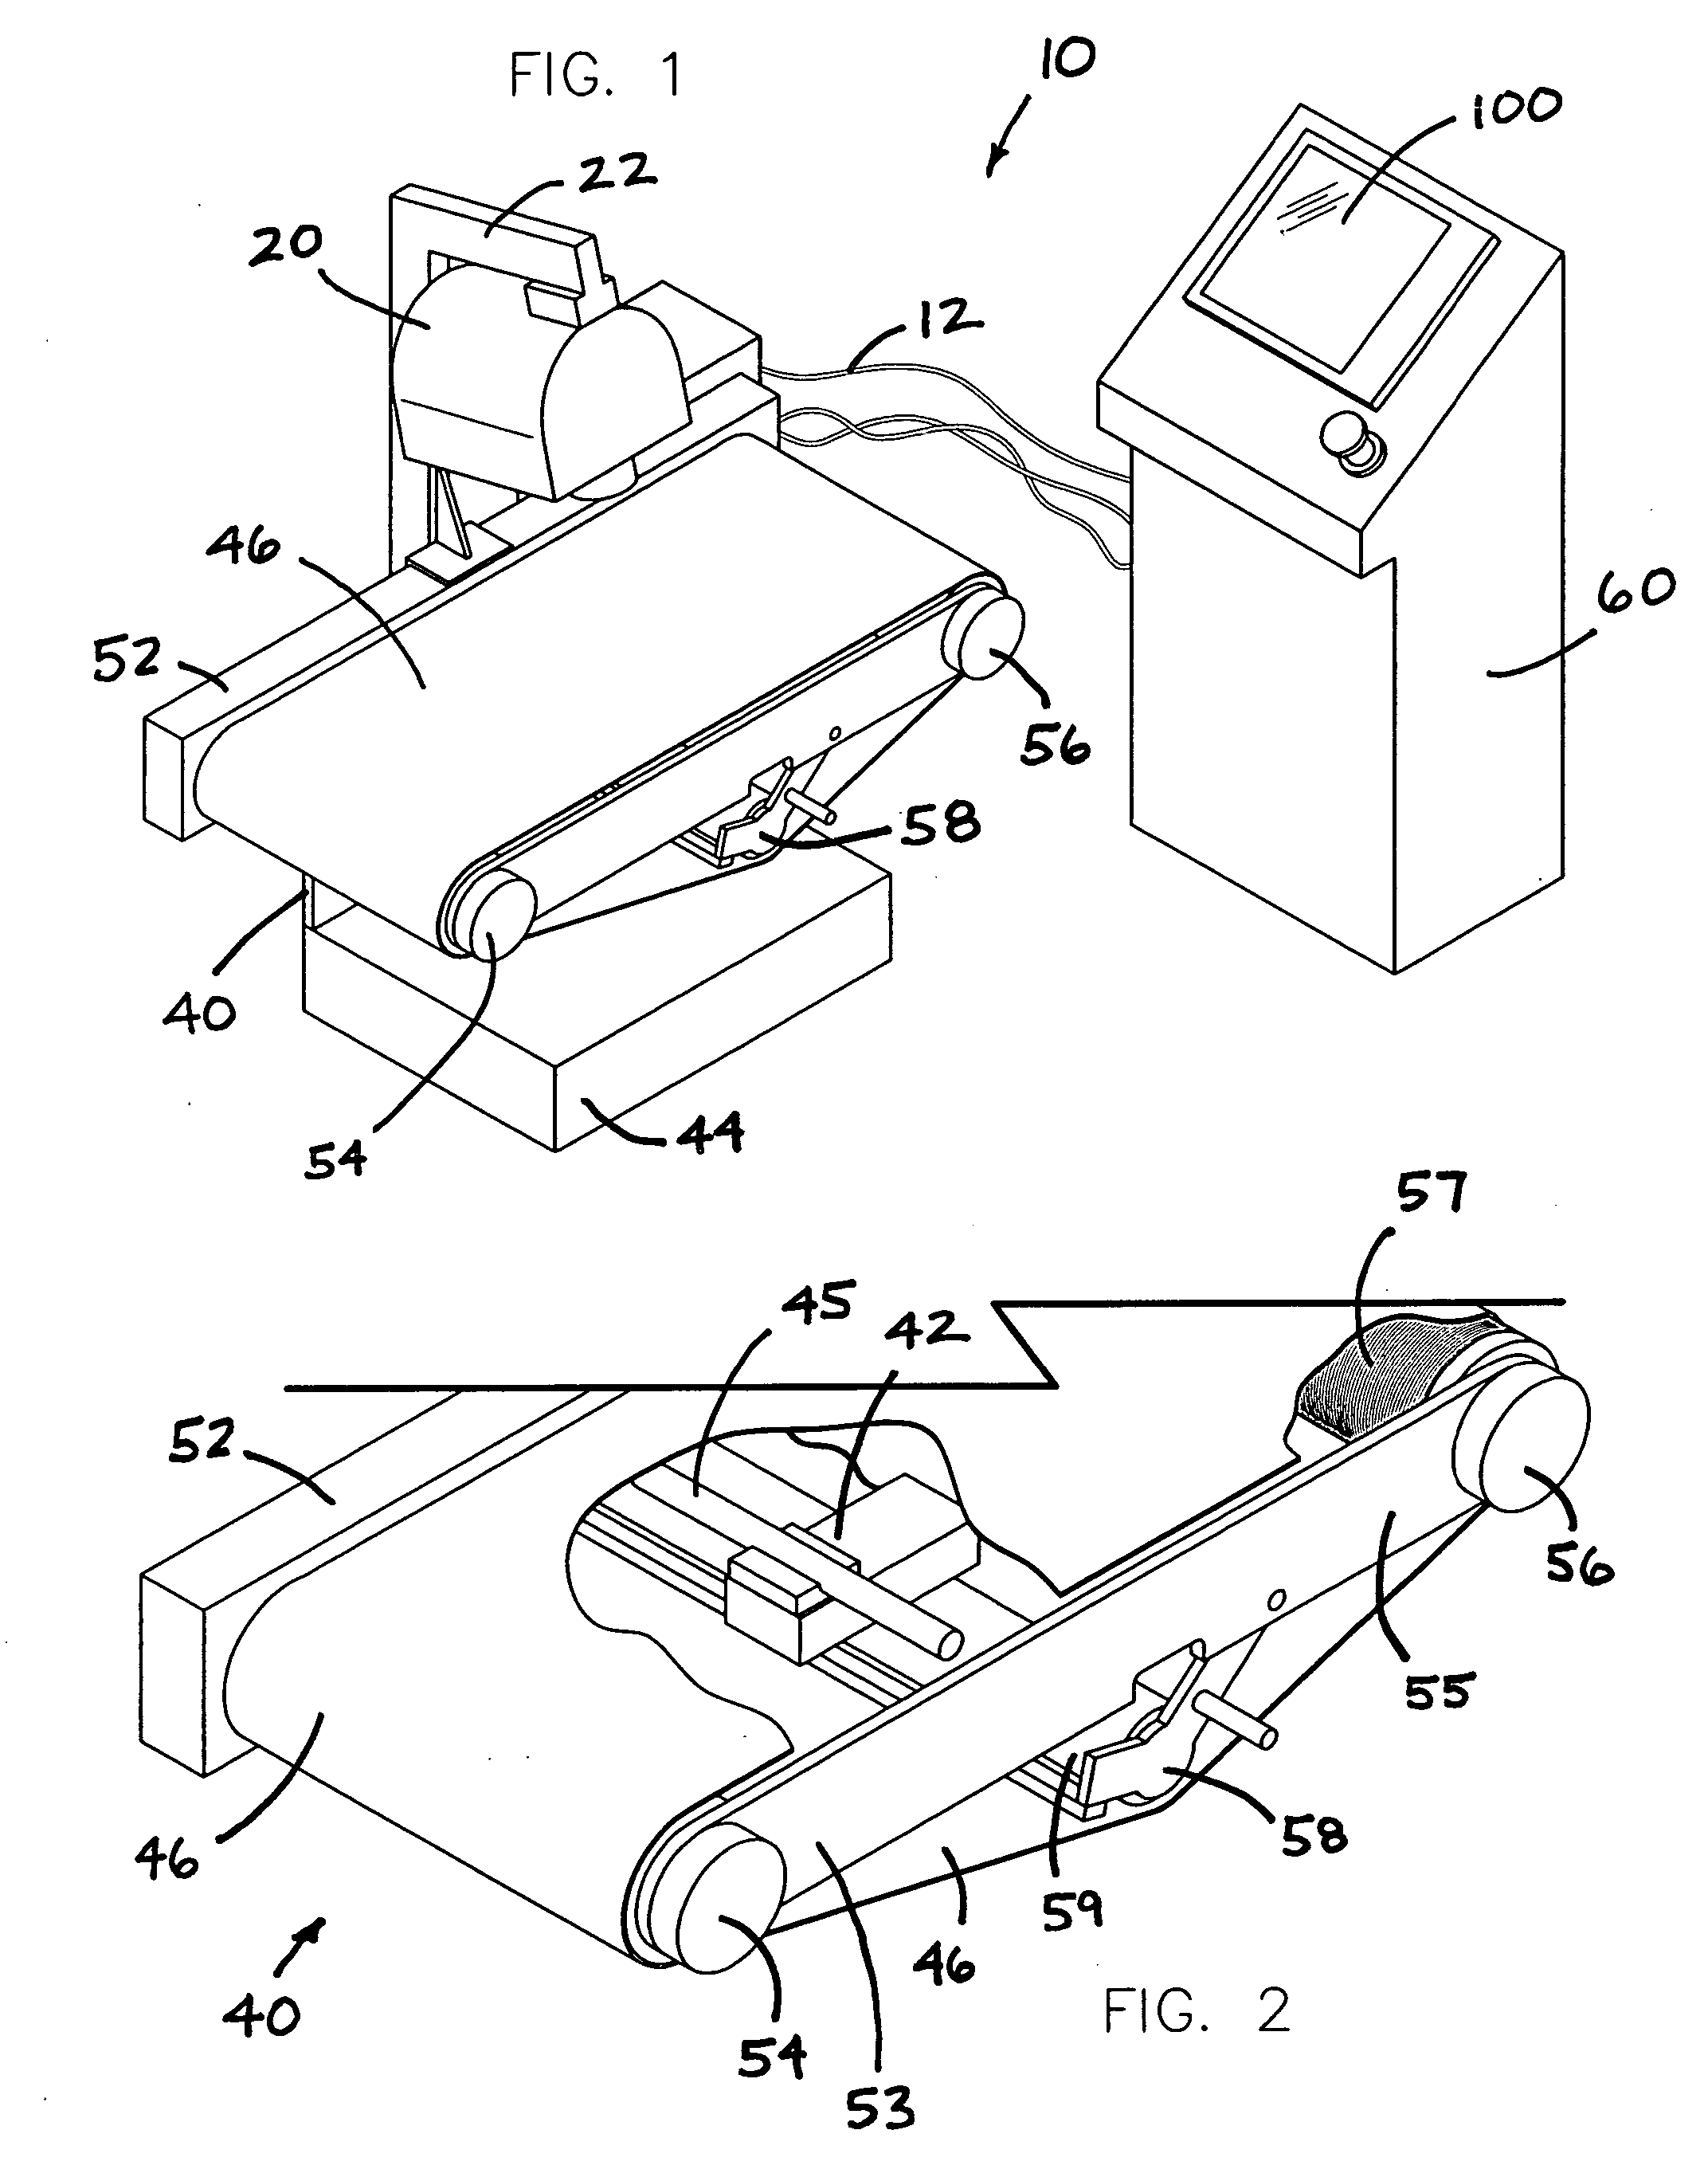 Production meat analysis system and method